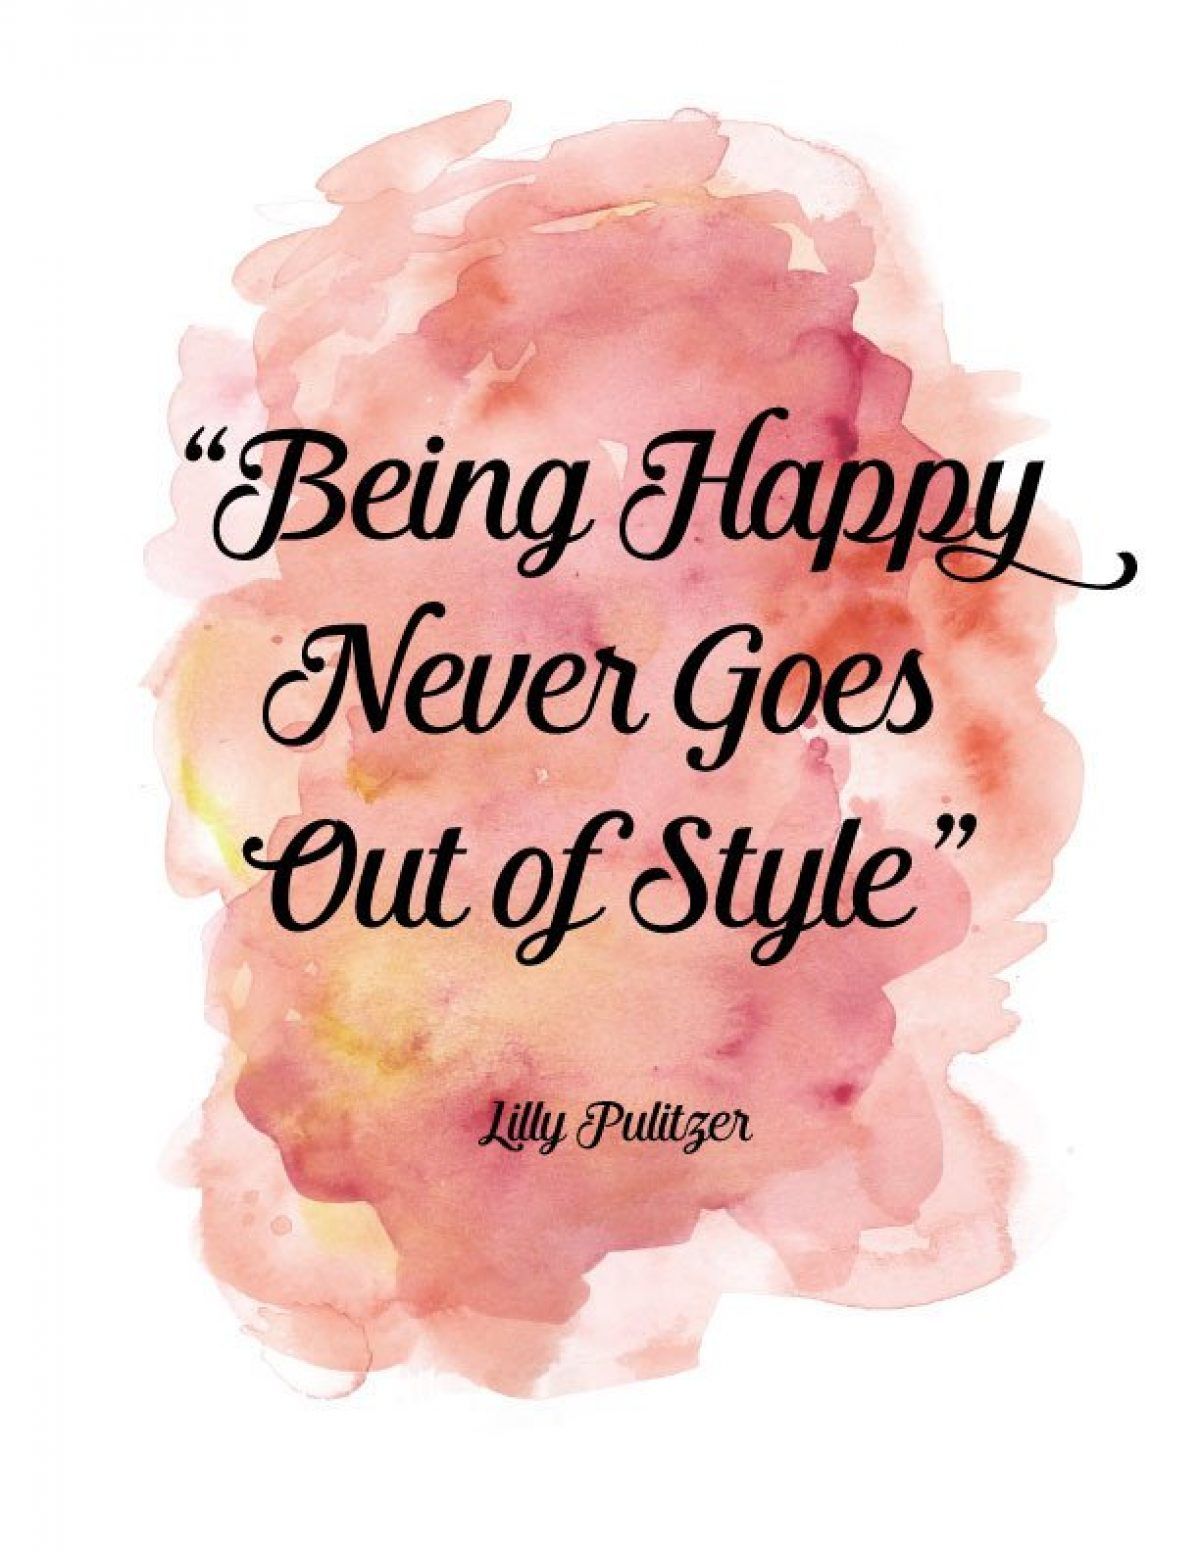 girly quotes about happiness